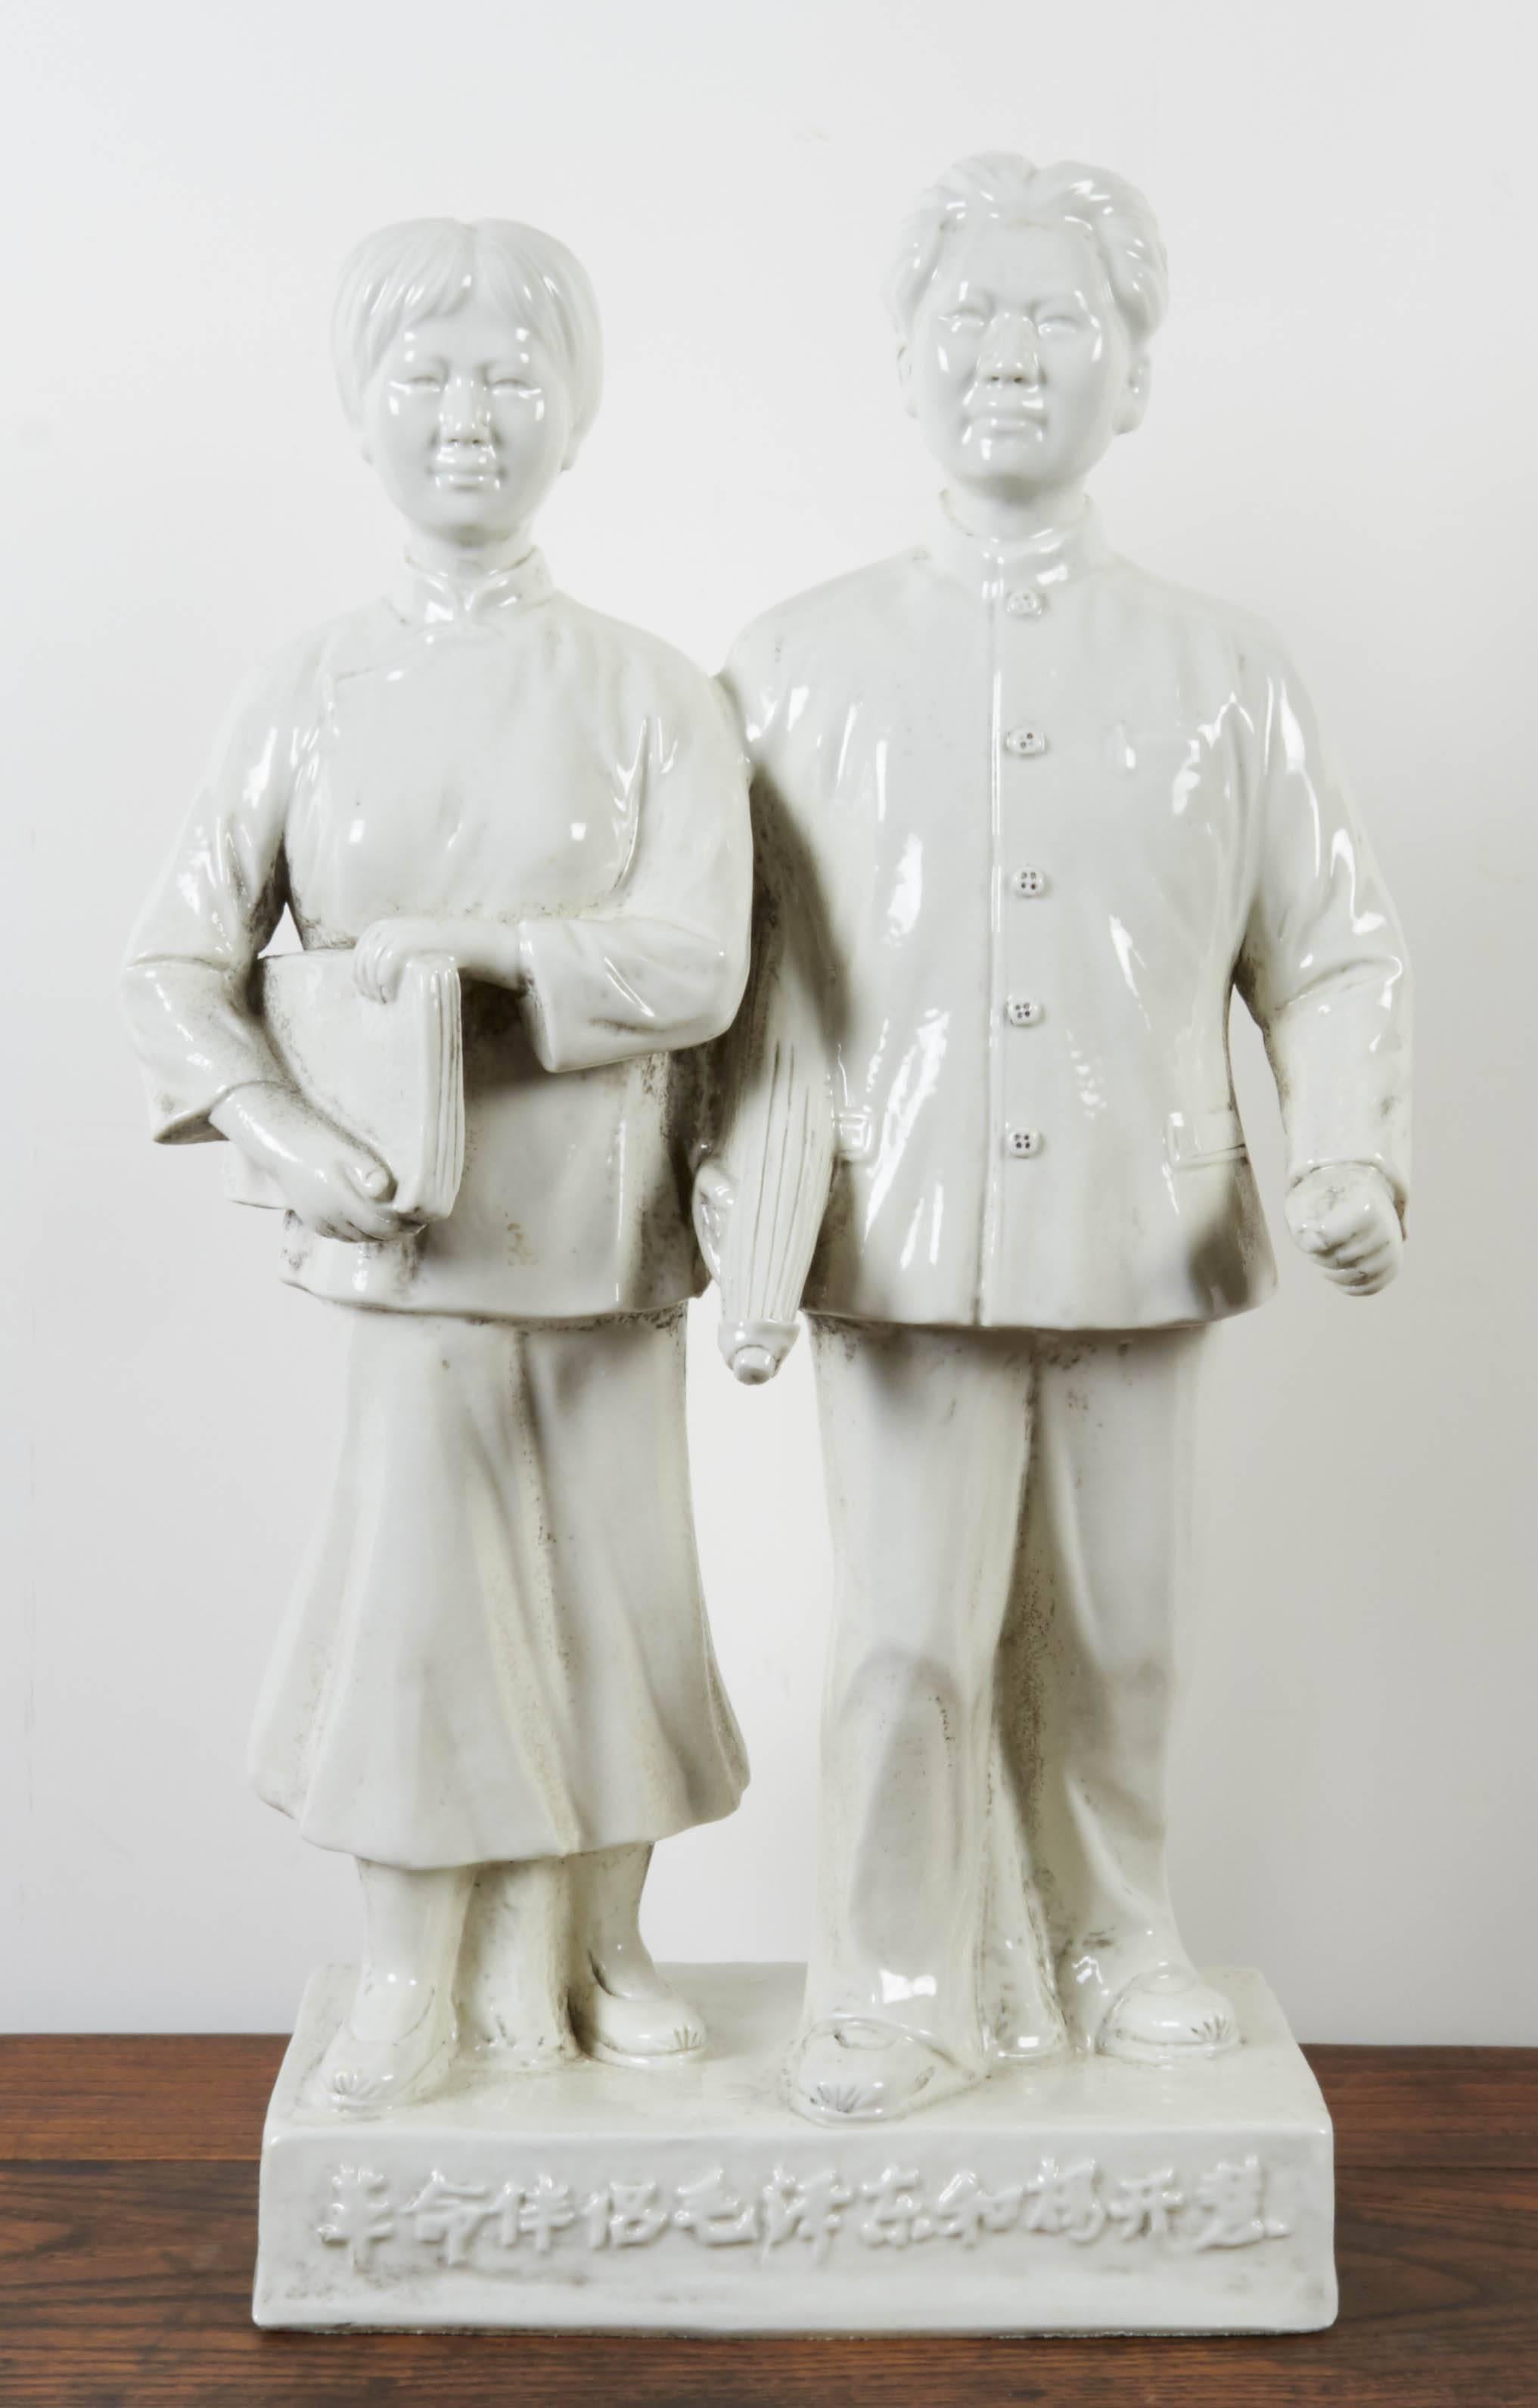 A rarely seen piece of Cultural Revolution memorabilia, this finely wrought porcelain statue of Madame and Chairman Mao is an incredibly detailed and powerful piece, China, circa 1970s.
WA656.